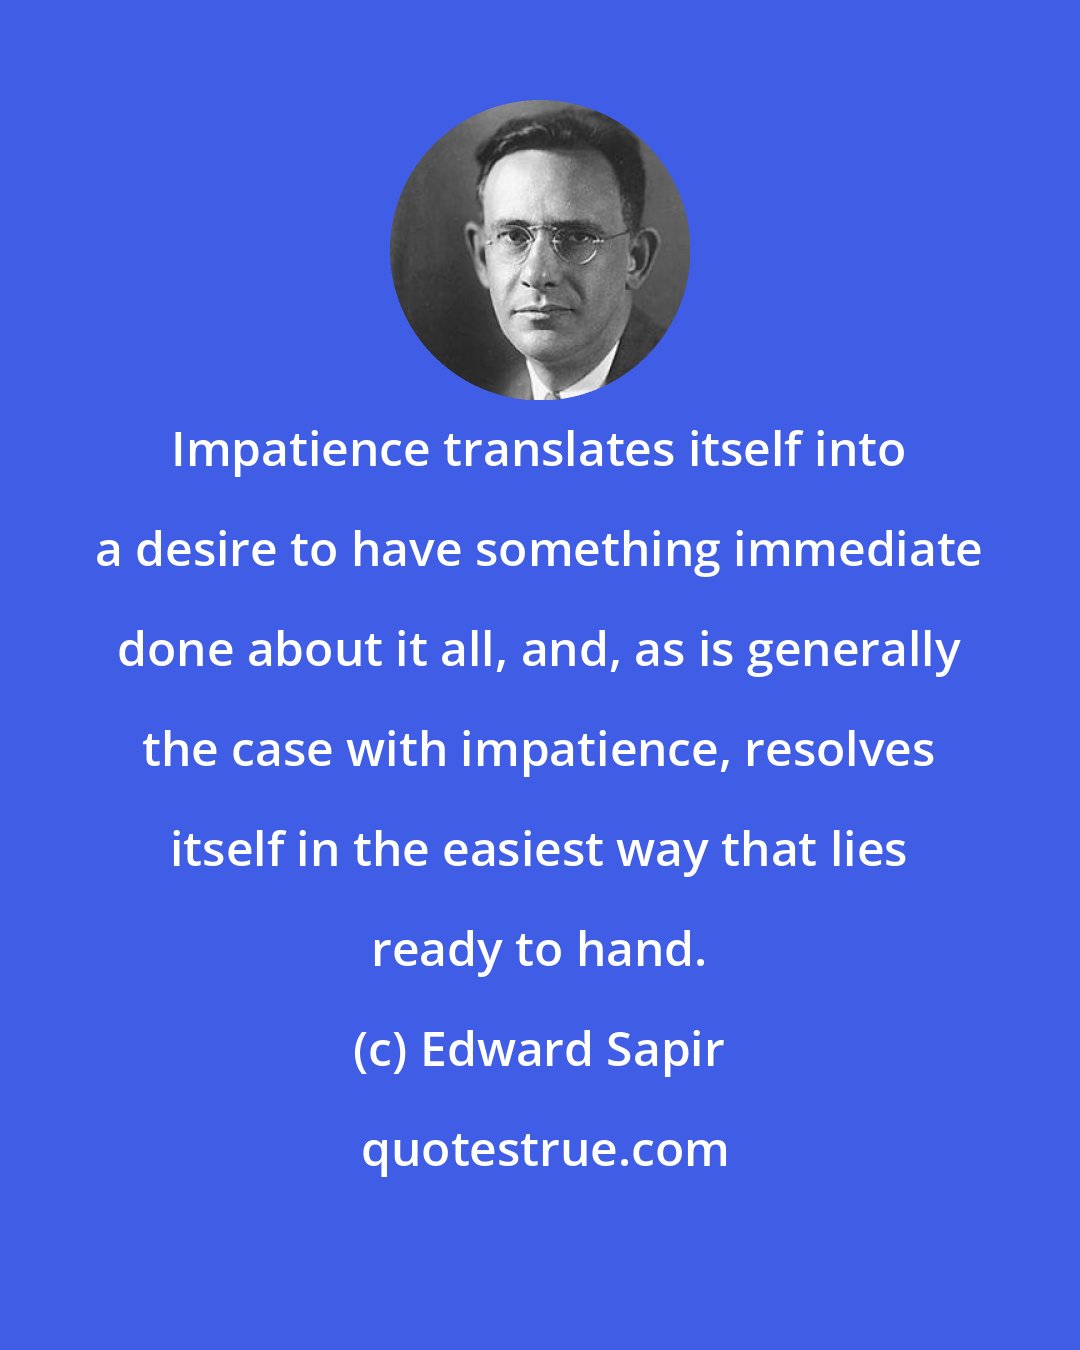 Edward Sapir: Impatience translates itself into a desire to have something immediate done about it all, and, as is generally the case with impatience, resolves itself in the easiest way that lies ready to hand.